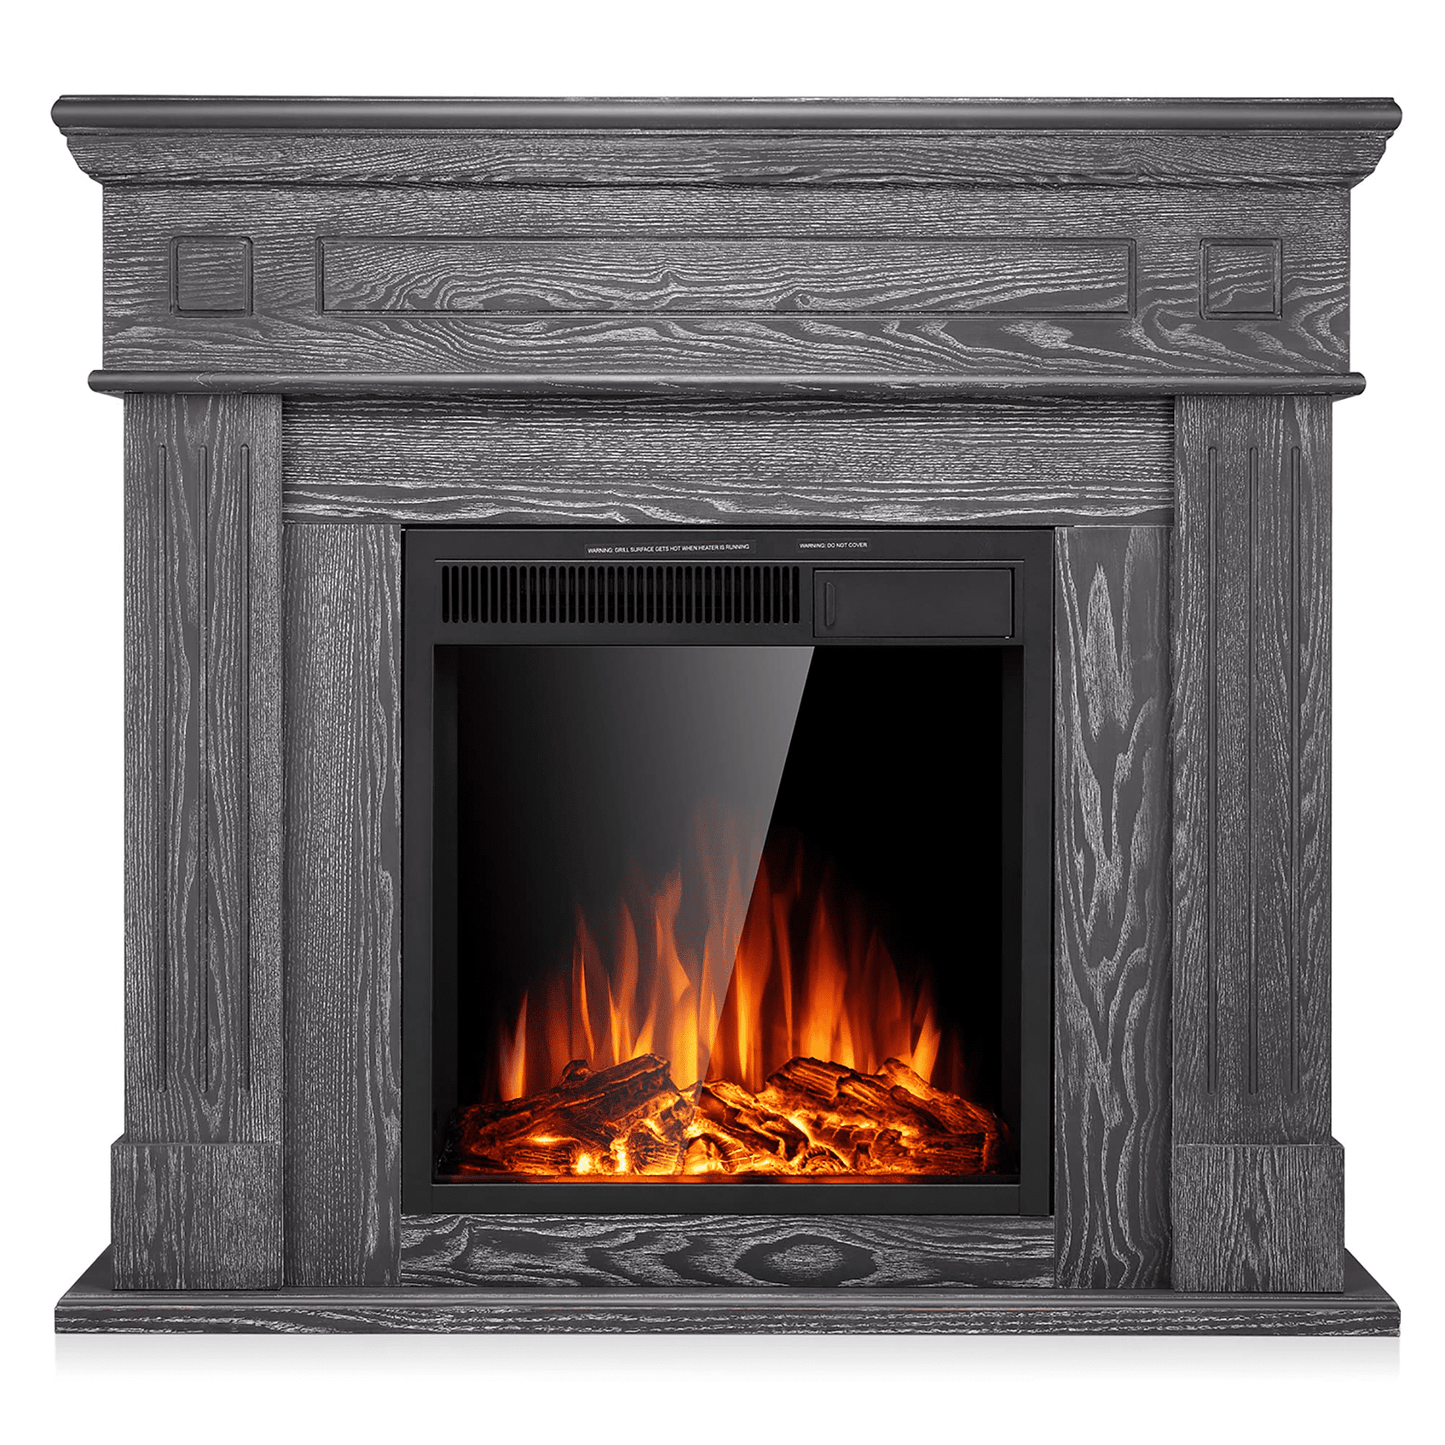 KISSAIR Electric Mantel Fireplace,Wood Package Surround,Freestanding,Adjustable Led Flame, Remote Control, 750W-1500W, Gray